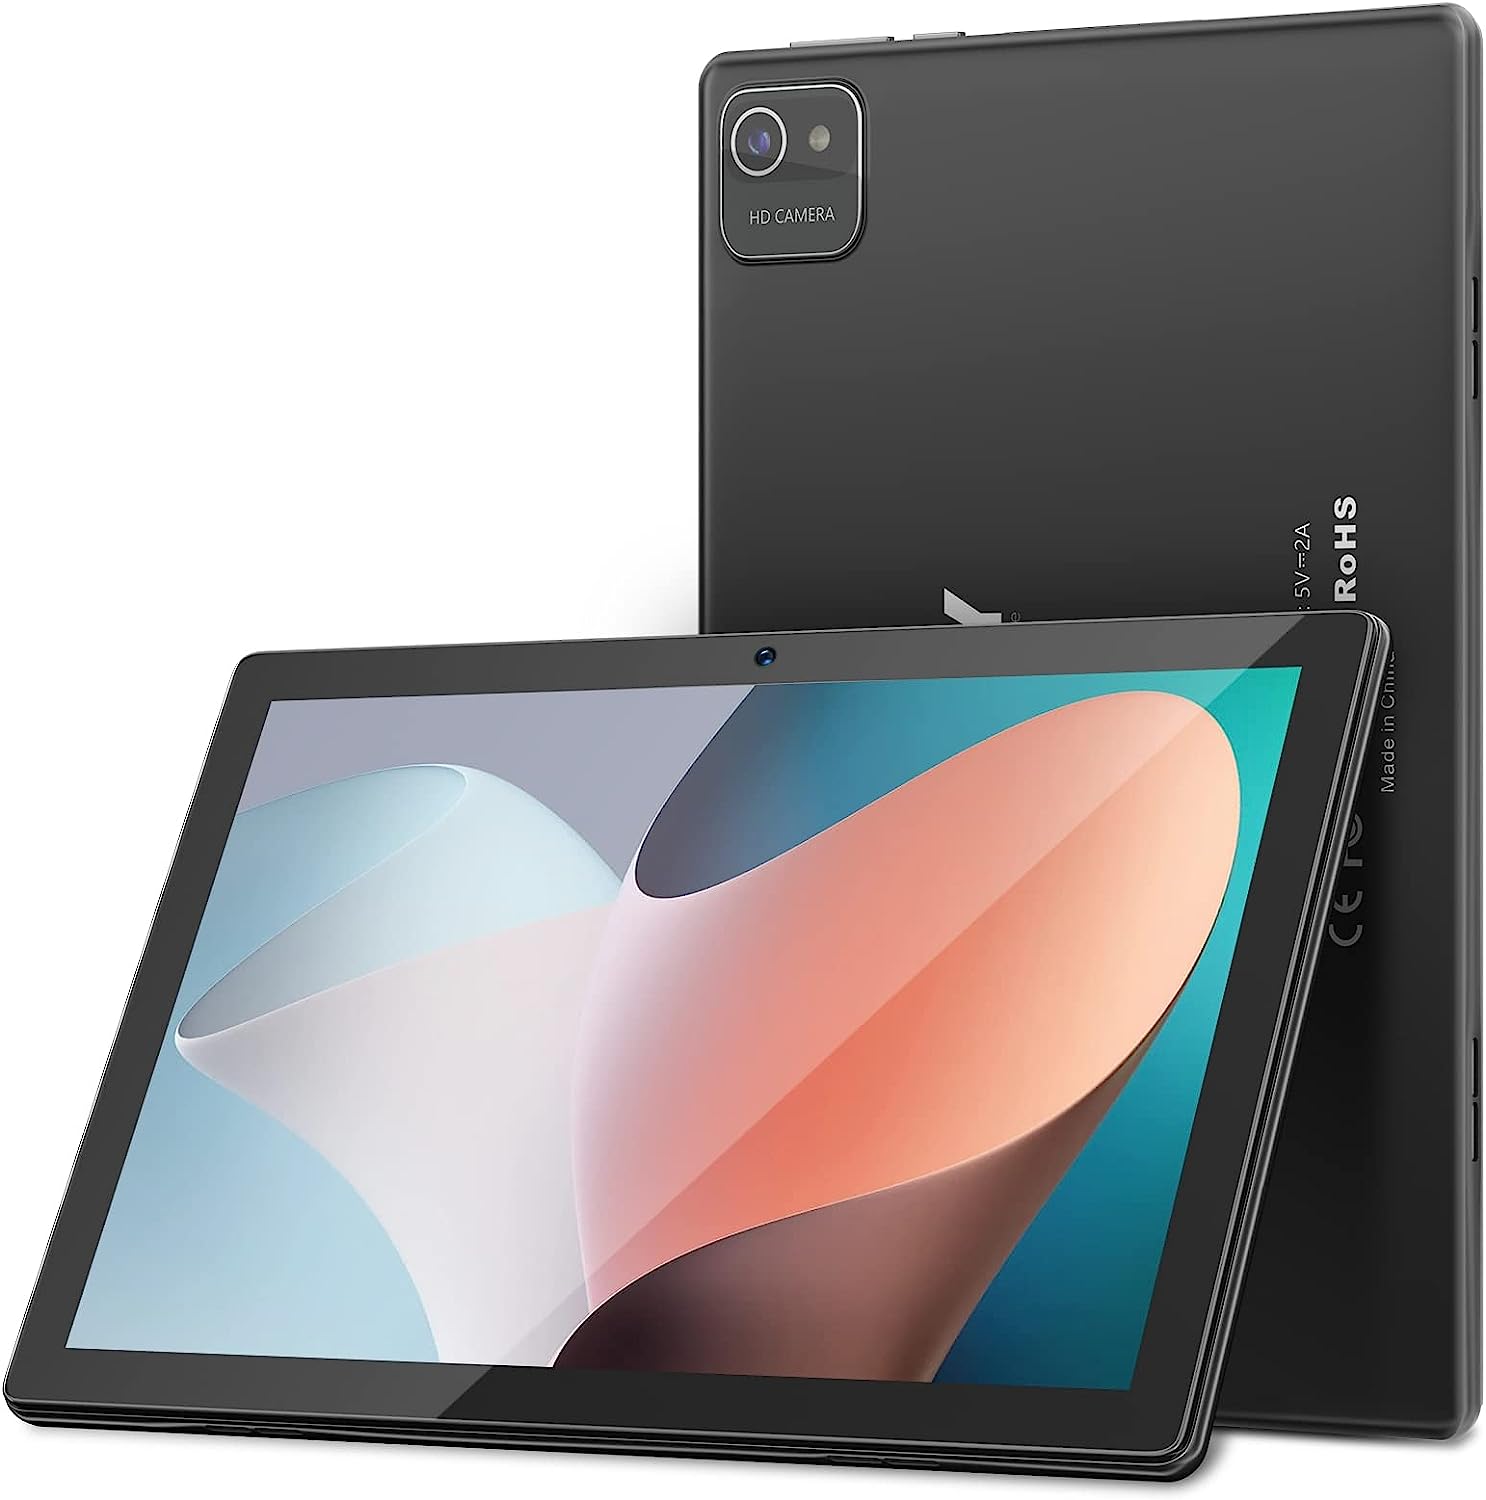 Xgody N01 - Excellent Mid-Range Tablet With Great Features